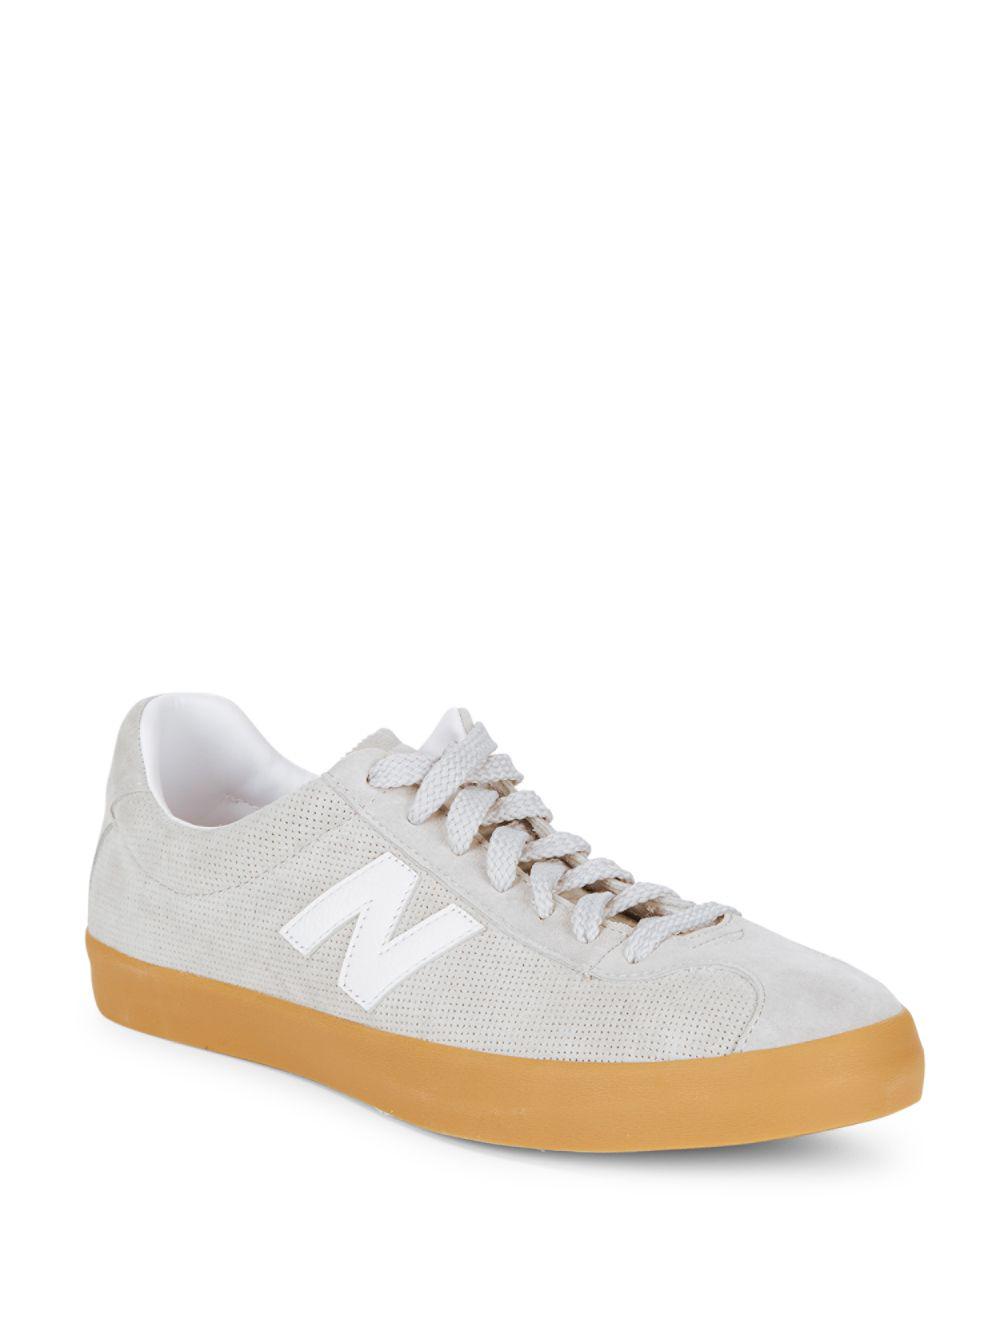 New Balance Tempus Suede Gum Sole Sneakers in Gray | Lyst